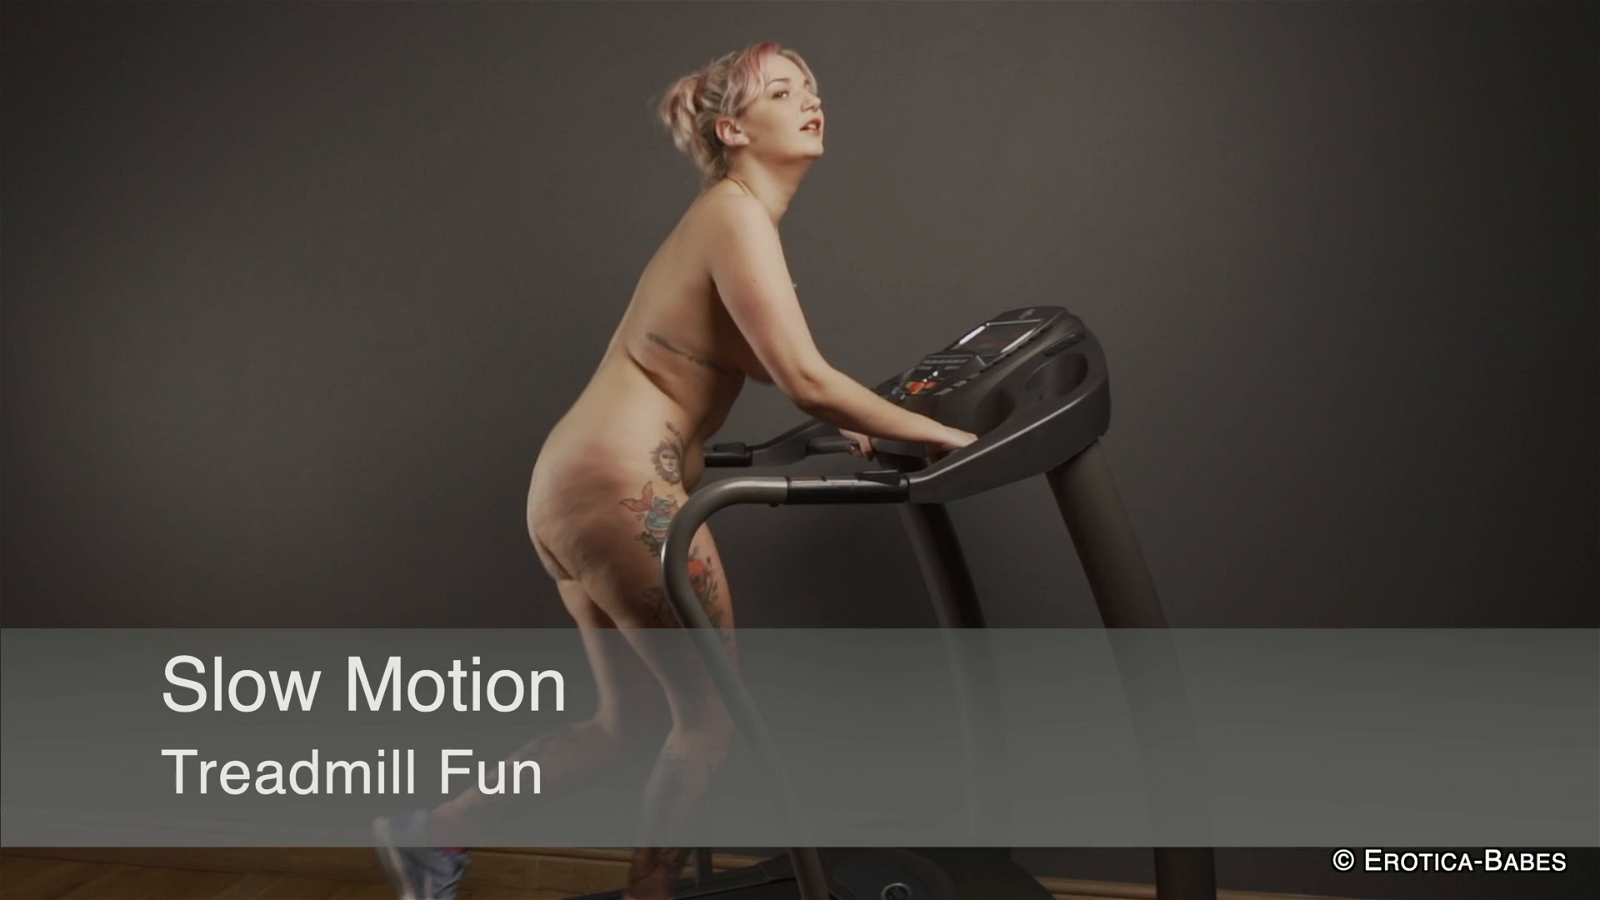 Video by EroticaBabes with the username @EroticaBabes,  June 11, 2020 at 10:40 AM. The post is about the topic Slow Motion Babes and the text says 'This is BadDolly on our treadmill. The whole scene is 17 minutes long. This is a long clip of the slow motion sequence for you. Enjoy. #SlowMotion #Treadmill #NudeExercise #Slow #SloMo'